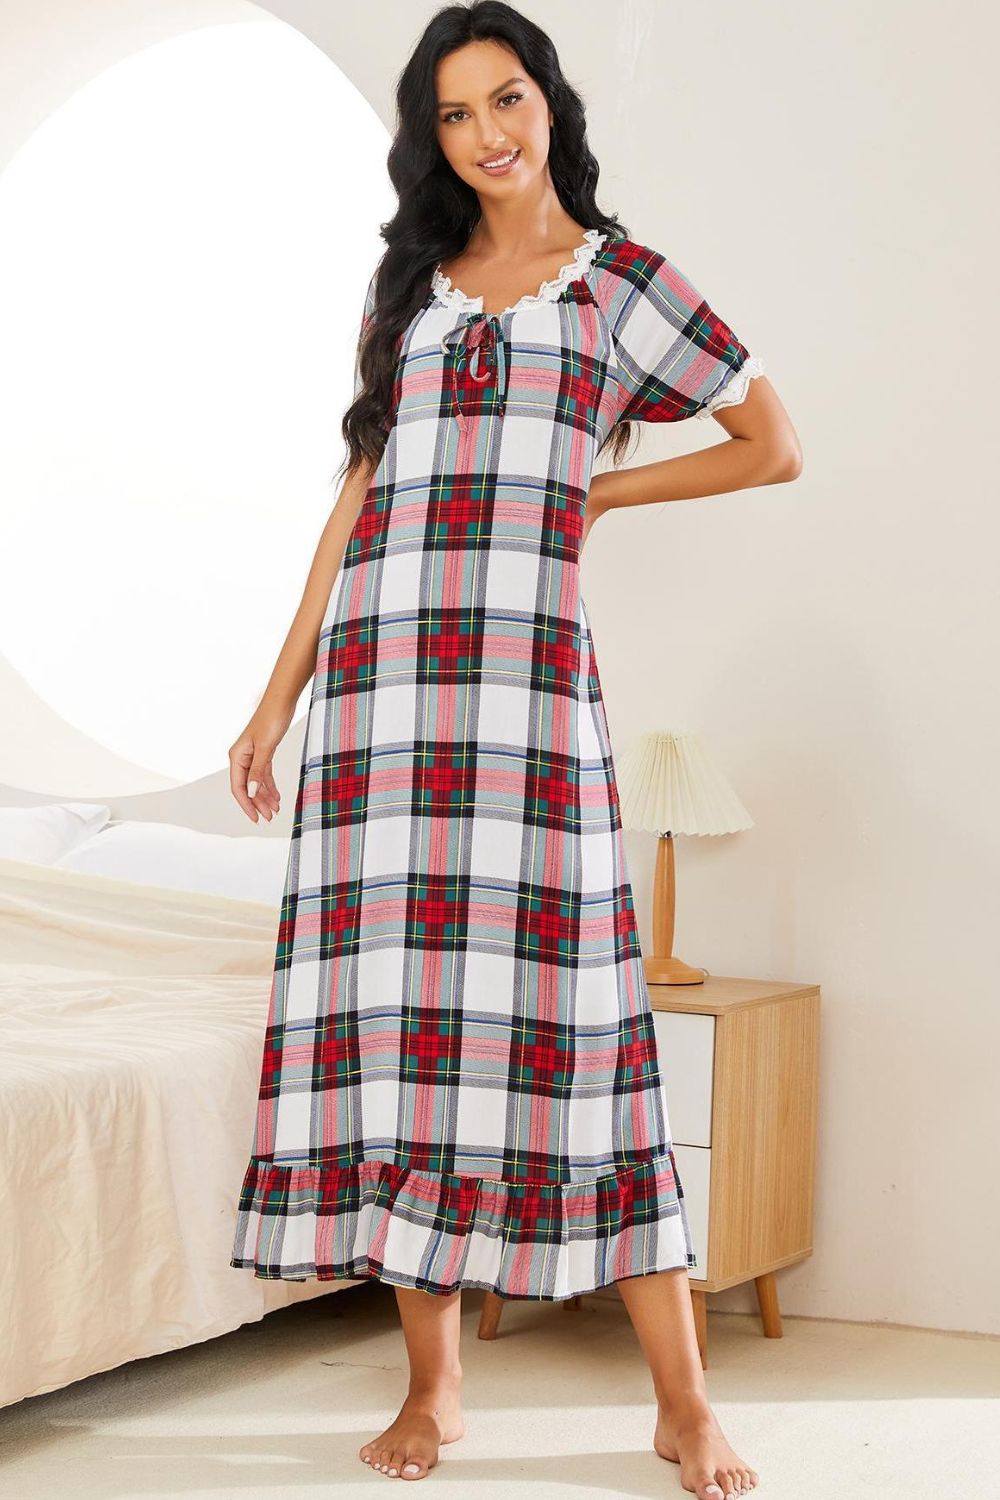 Plaid Lace Trim Ruffle Hem Night Dress - Tophatter Deals and Online Shopping - Electronics, Jewelry, Beauty, Health, Gadgets, Fashion - Tophatter's Discounts & Offers - tophatters - tophatters.co